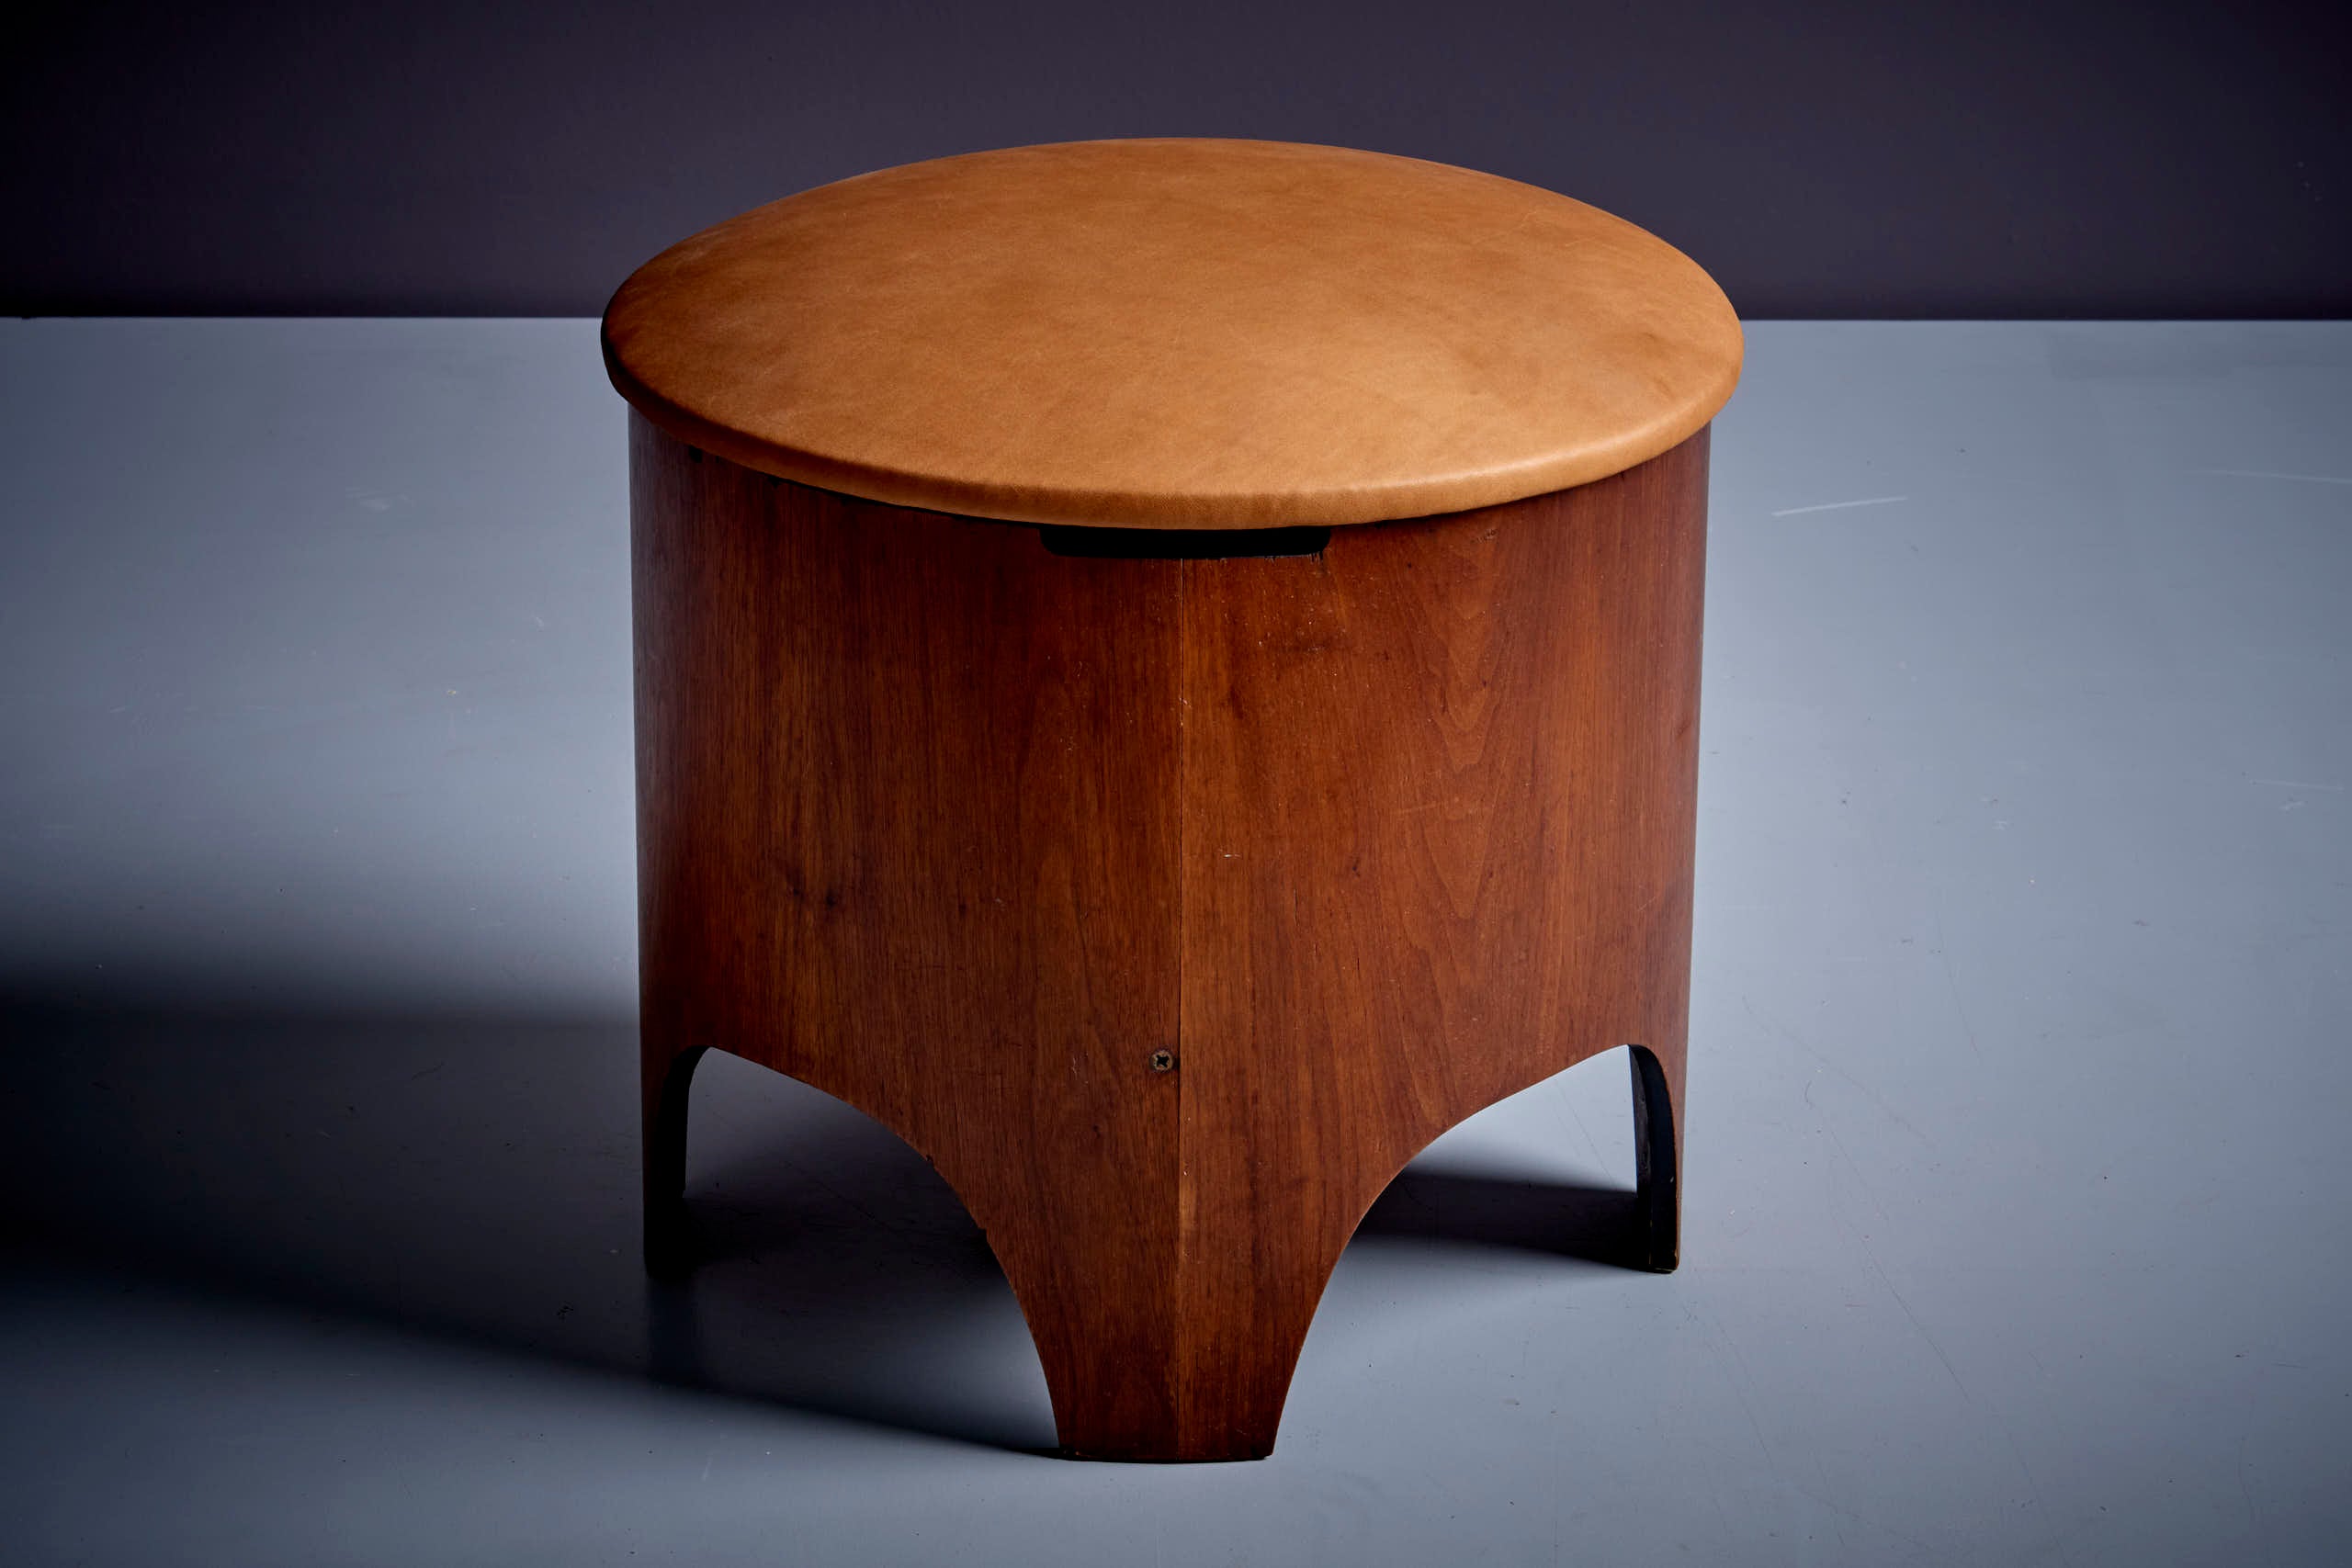 Henry P glass stool with hidden storage compartment. The stool has a new aniline leather upholstery. The stool can also be used as storage space and features a removable top.